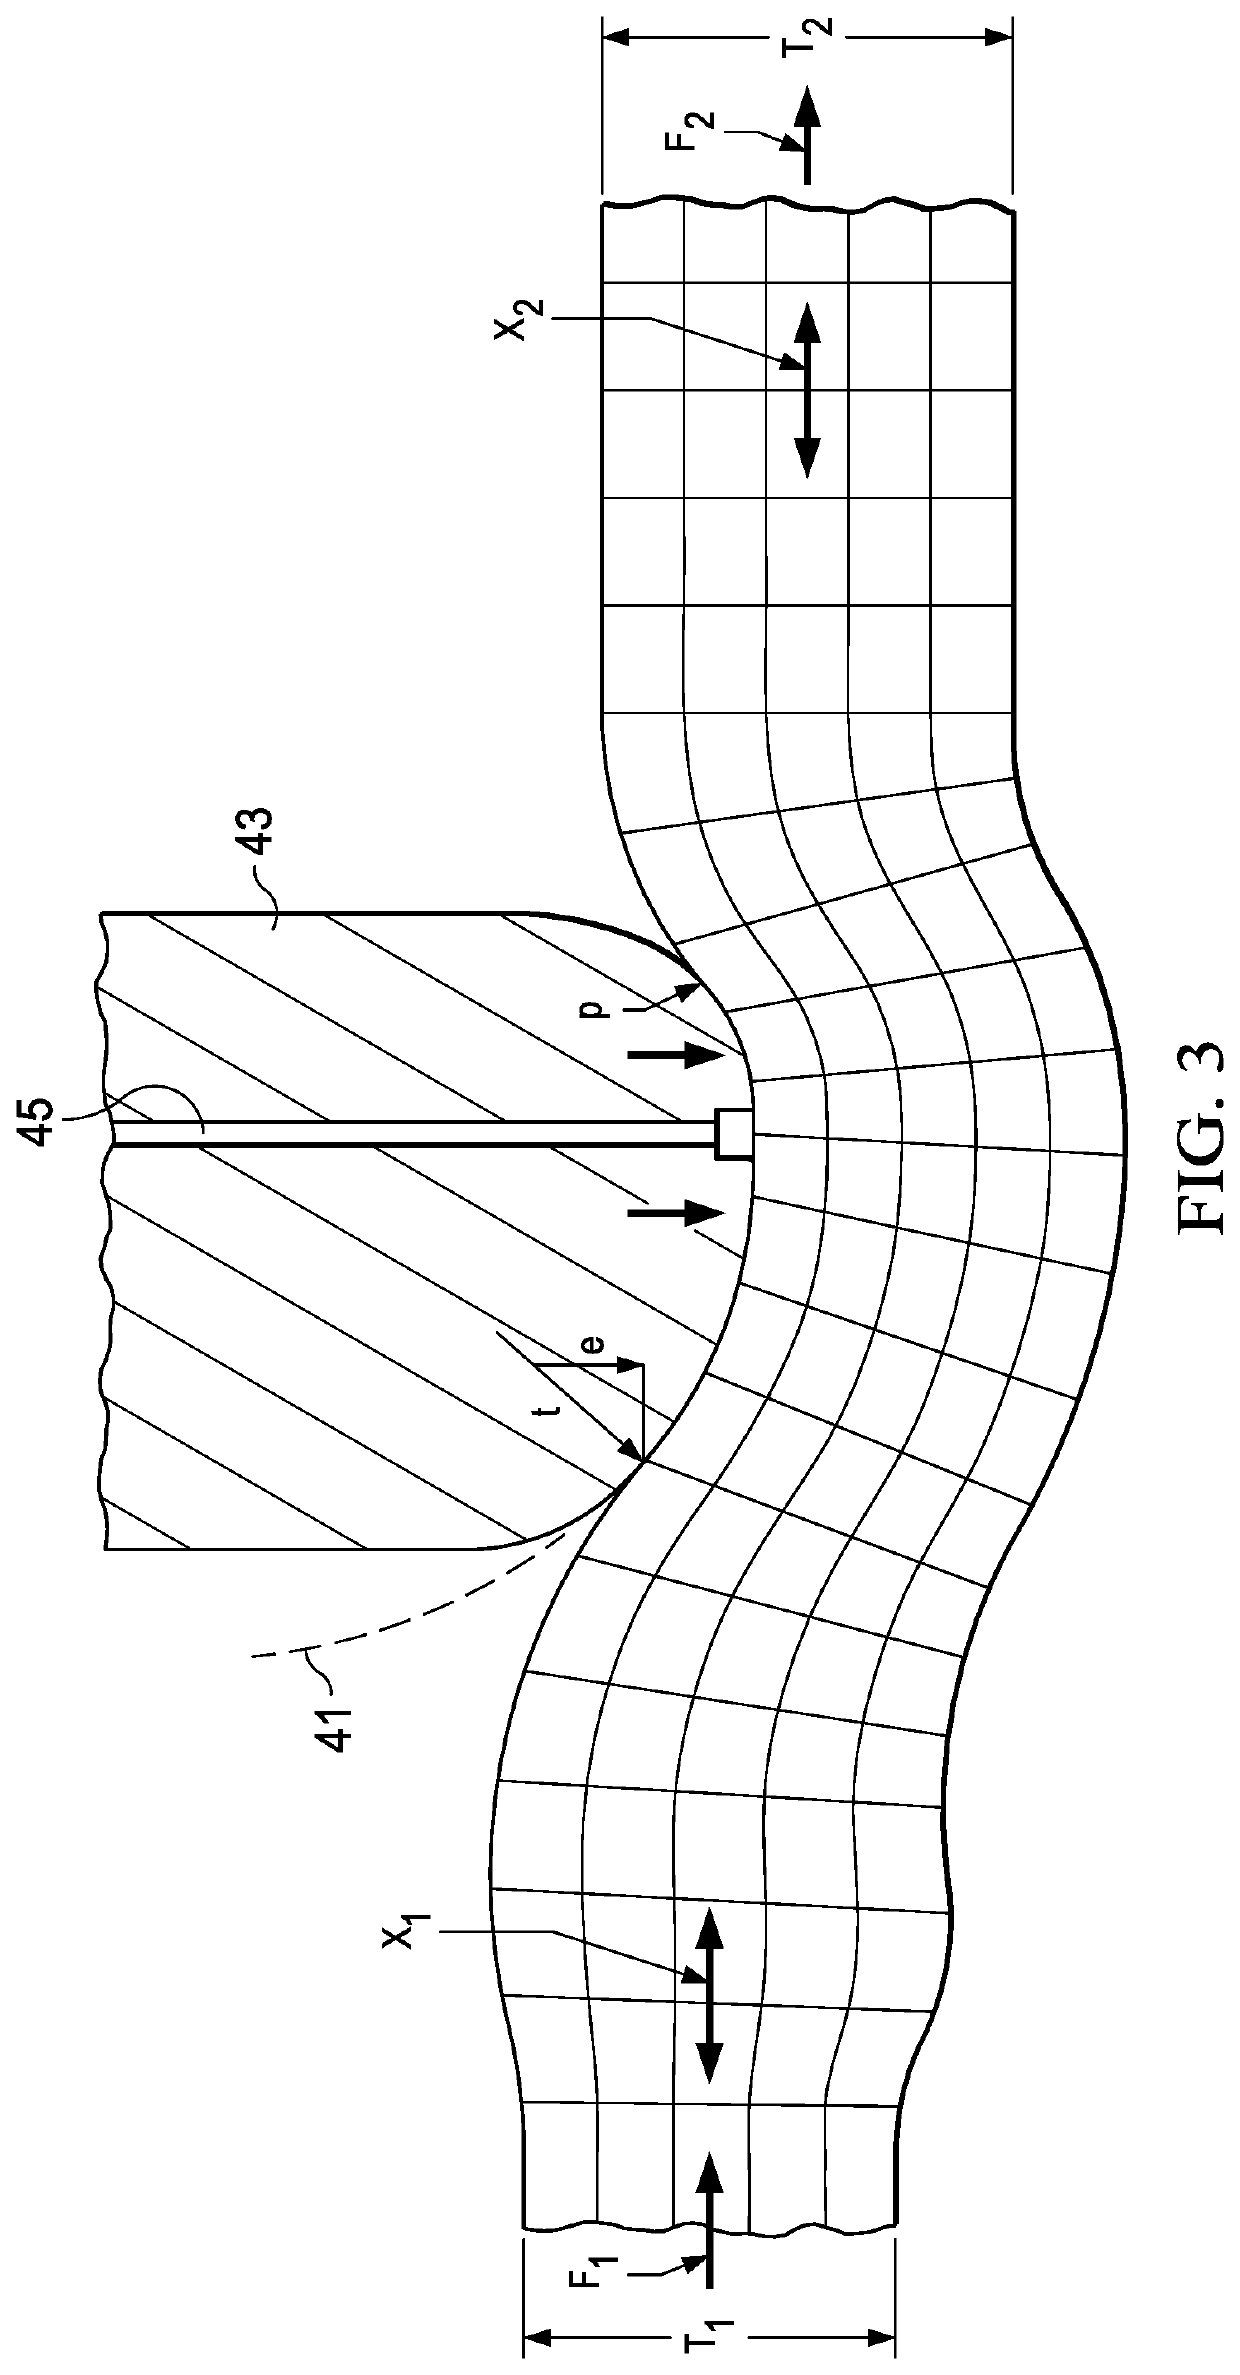 Apparatus and Method for In-Situ Fabrication of Bi-Layer Composite Pipe By Deformation Manufacture of Compression-Fit, Shape Memory Polymer Pipe (SMPP) Mechanically United With Host Pipe